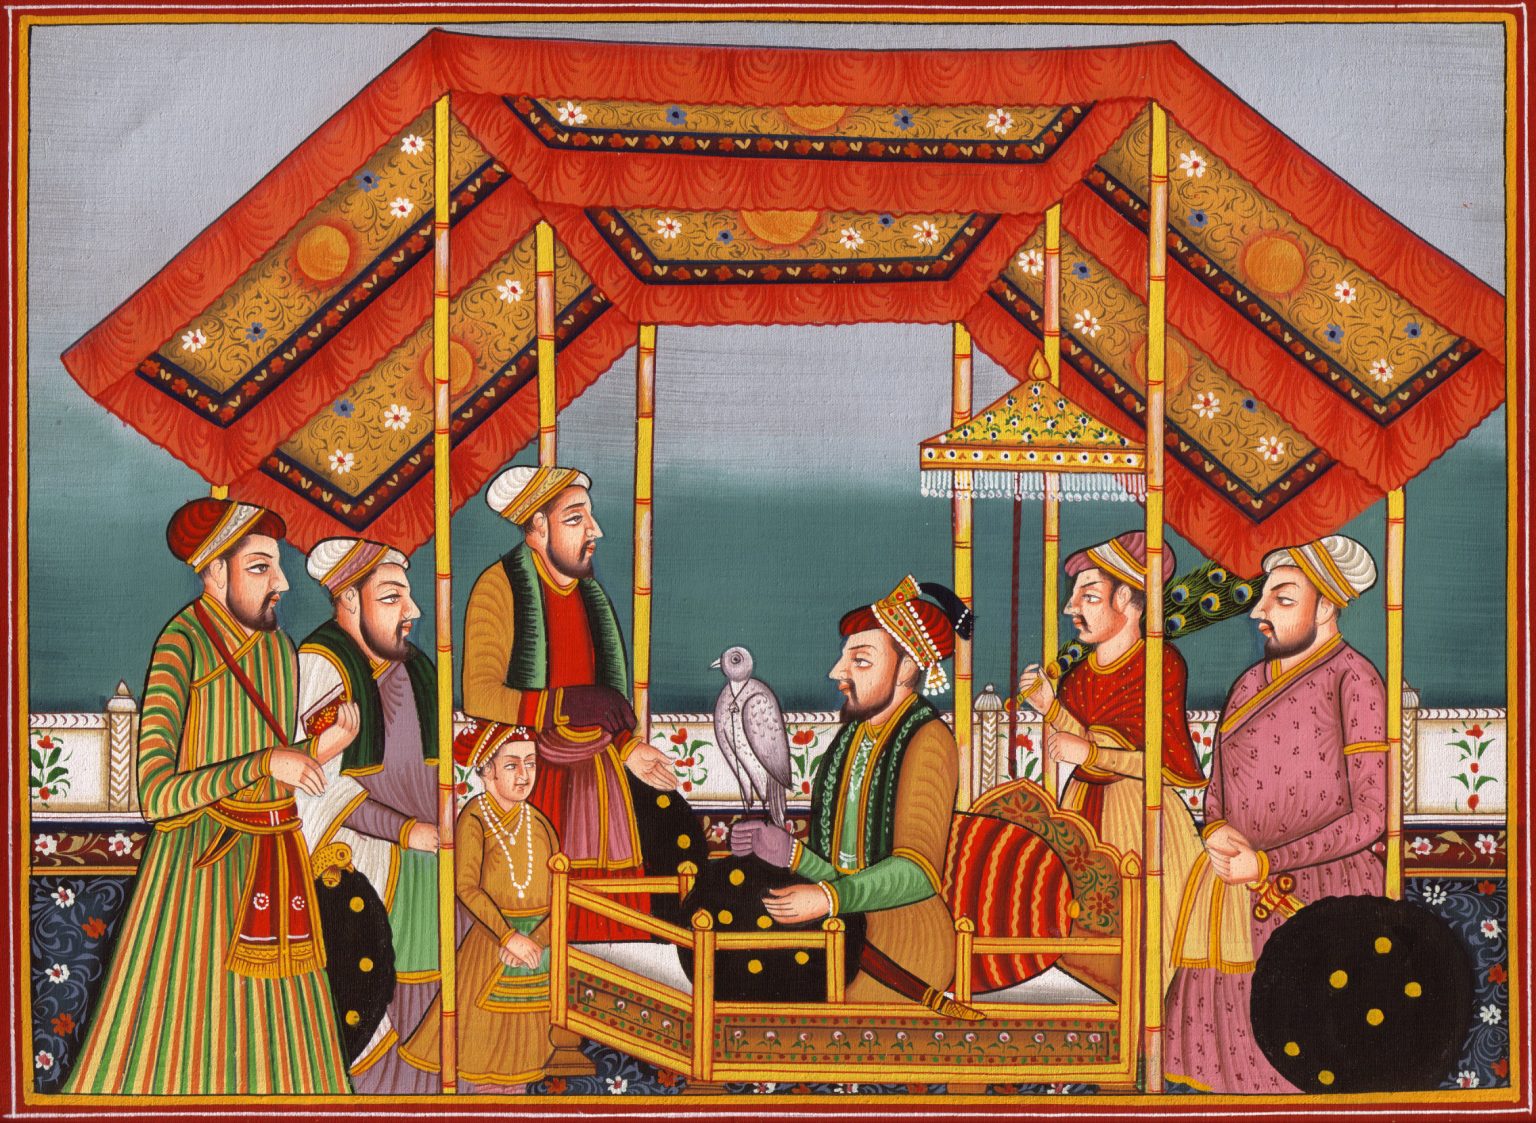 Mughal empire and his rulers discussed!